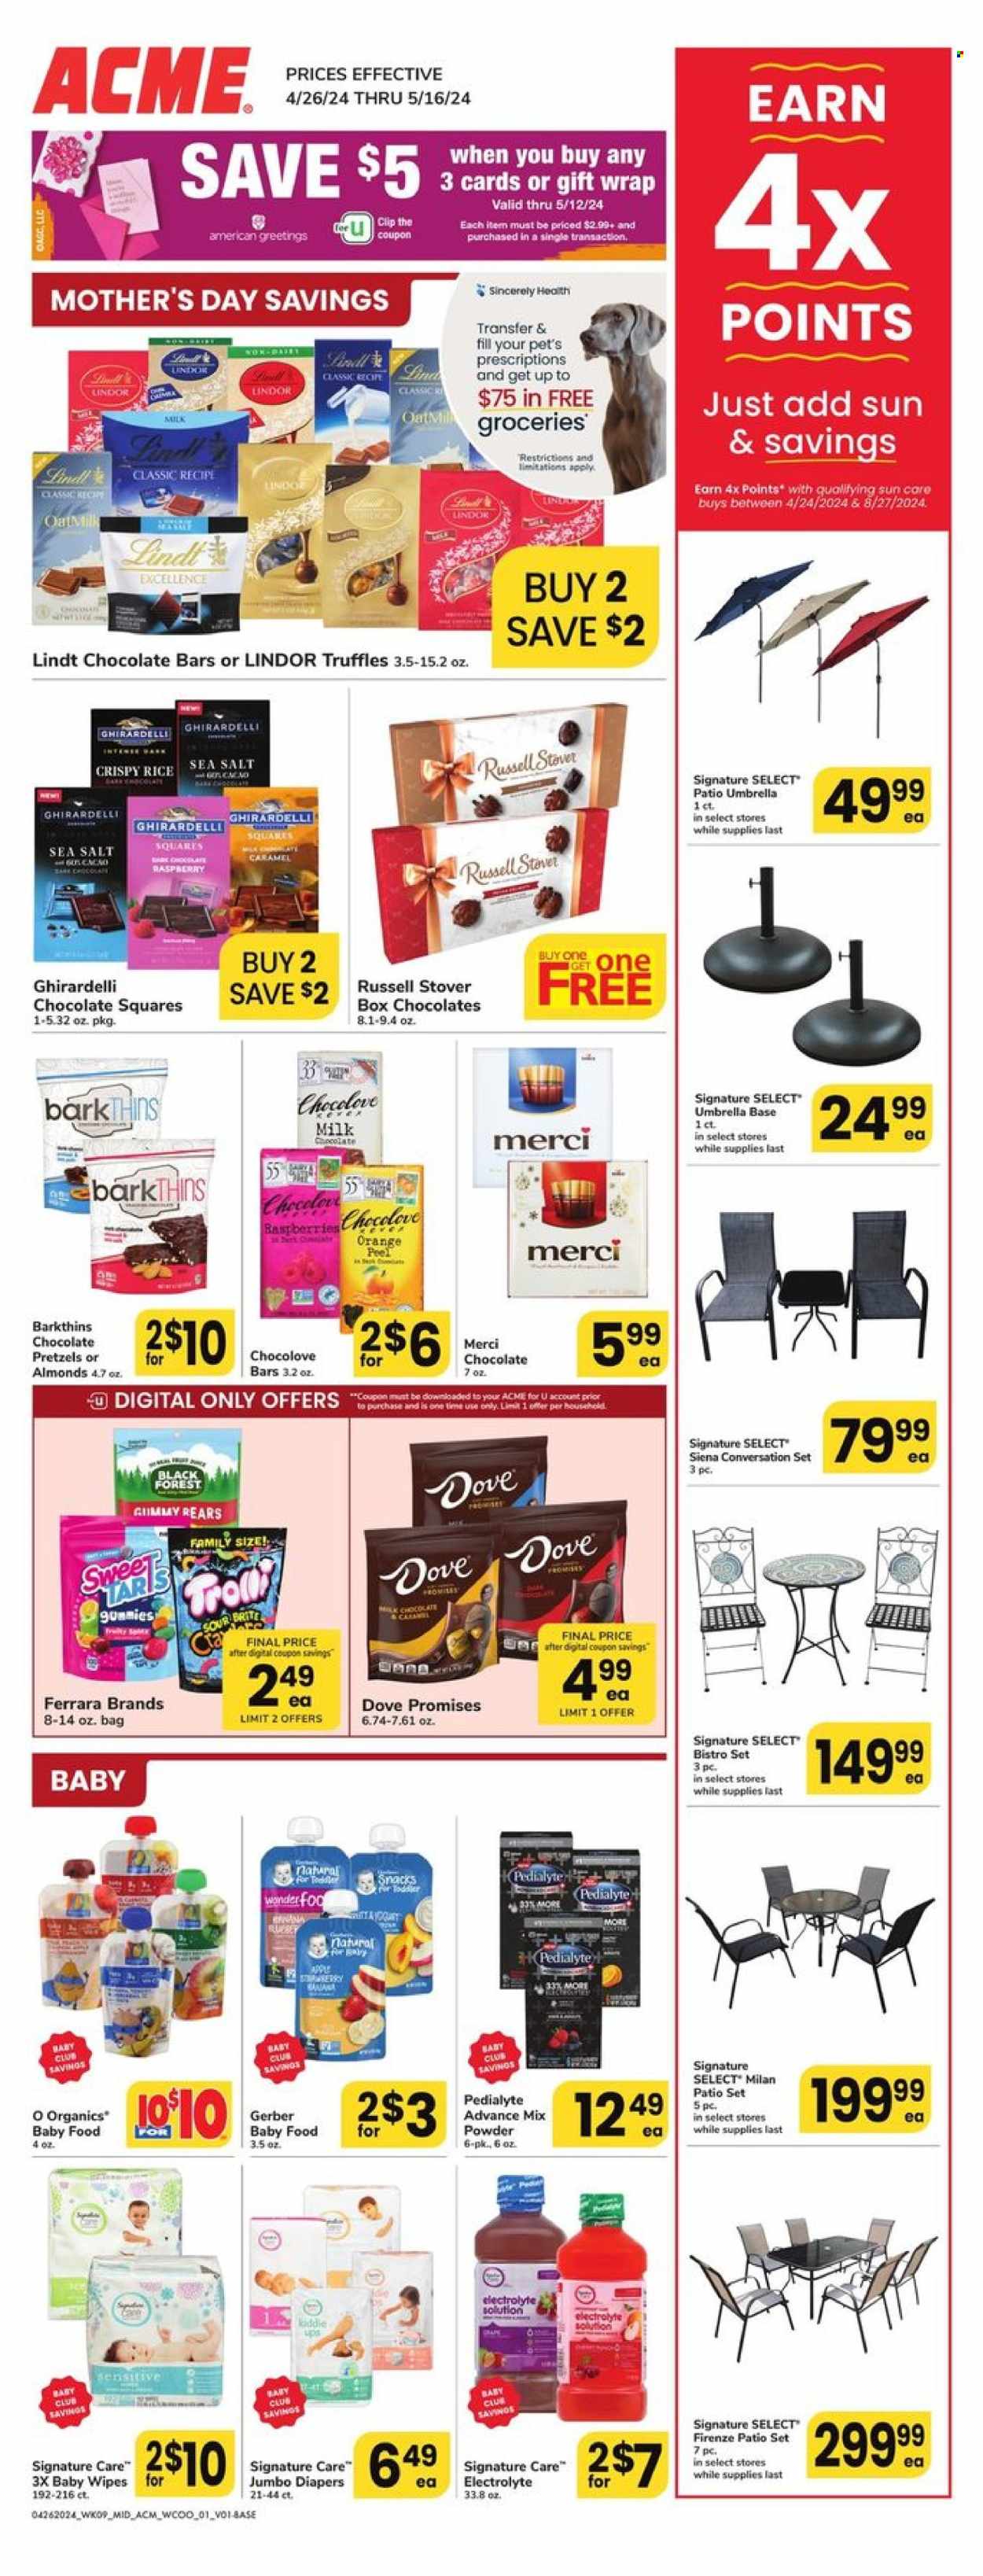 thumbnail - ACME Flyer - 04/26/2024 - 05/16/2024 - Sales products - pretzels, raspberries, snack, oat milk, plant-based milk, Dove, milk chocolate, Lindt, Lindor, truffles, jelly candy, Merci, Ghirardelli, chocolate bar, Dove Promises, bars, gummies, Gerber, sea salt, cereals, caramel, almonds, Pedialyte, TRULY, baby snack, wipes, baby wipes, nappies, sun care, Brite, gift wrap, umbrella, dietary supplement. Page 1.